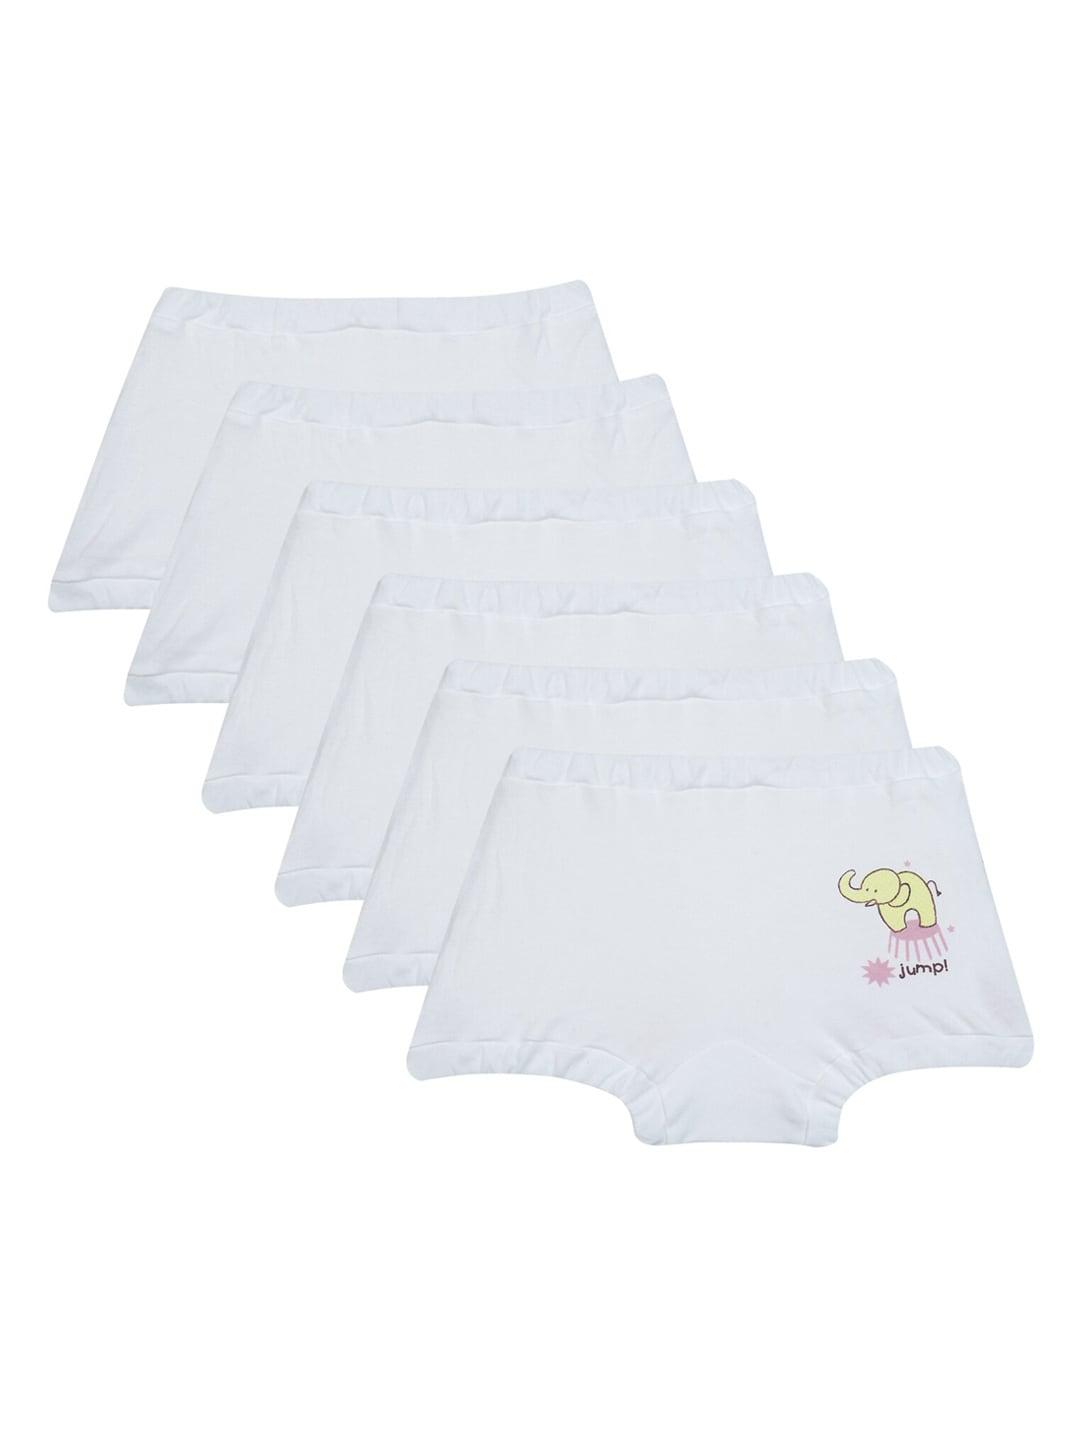 Bodycare Kids Boys Pack of 6 White Printed Cotton Trunks